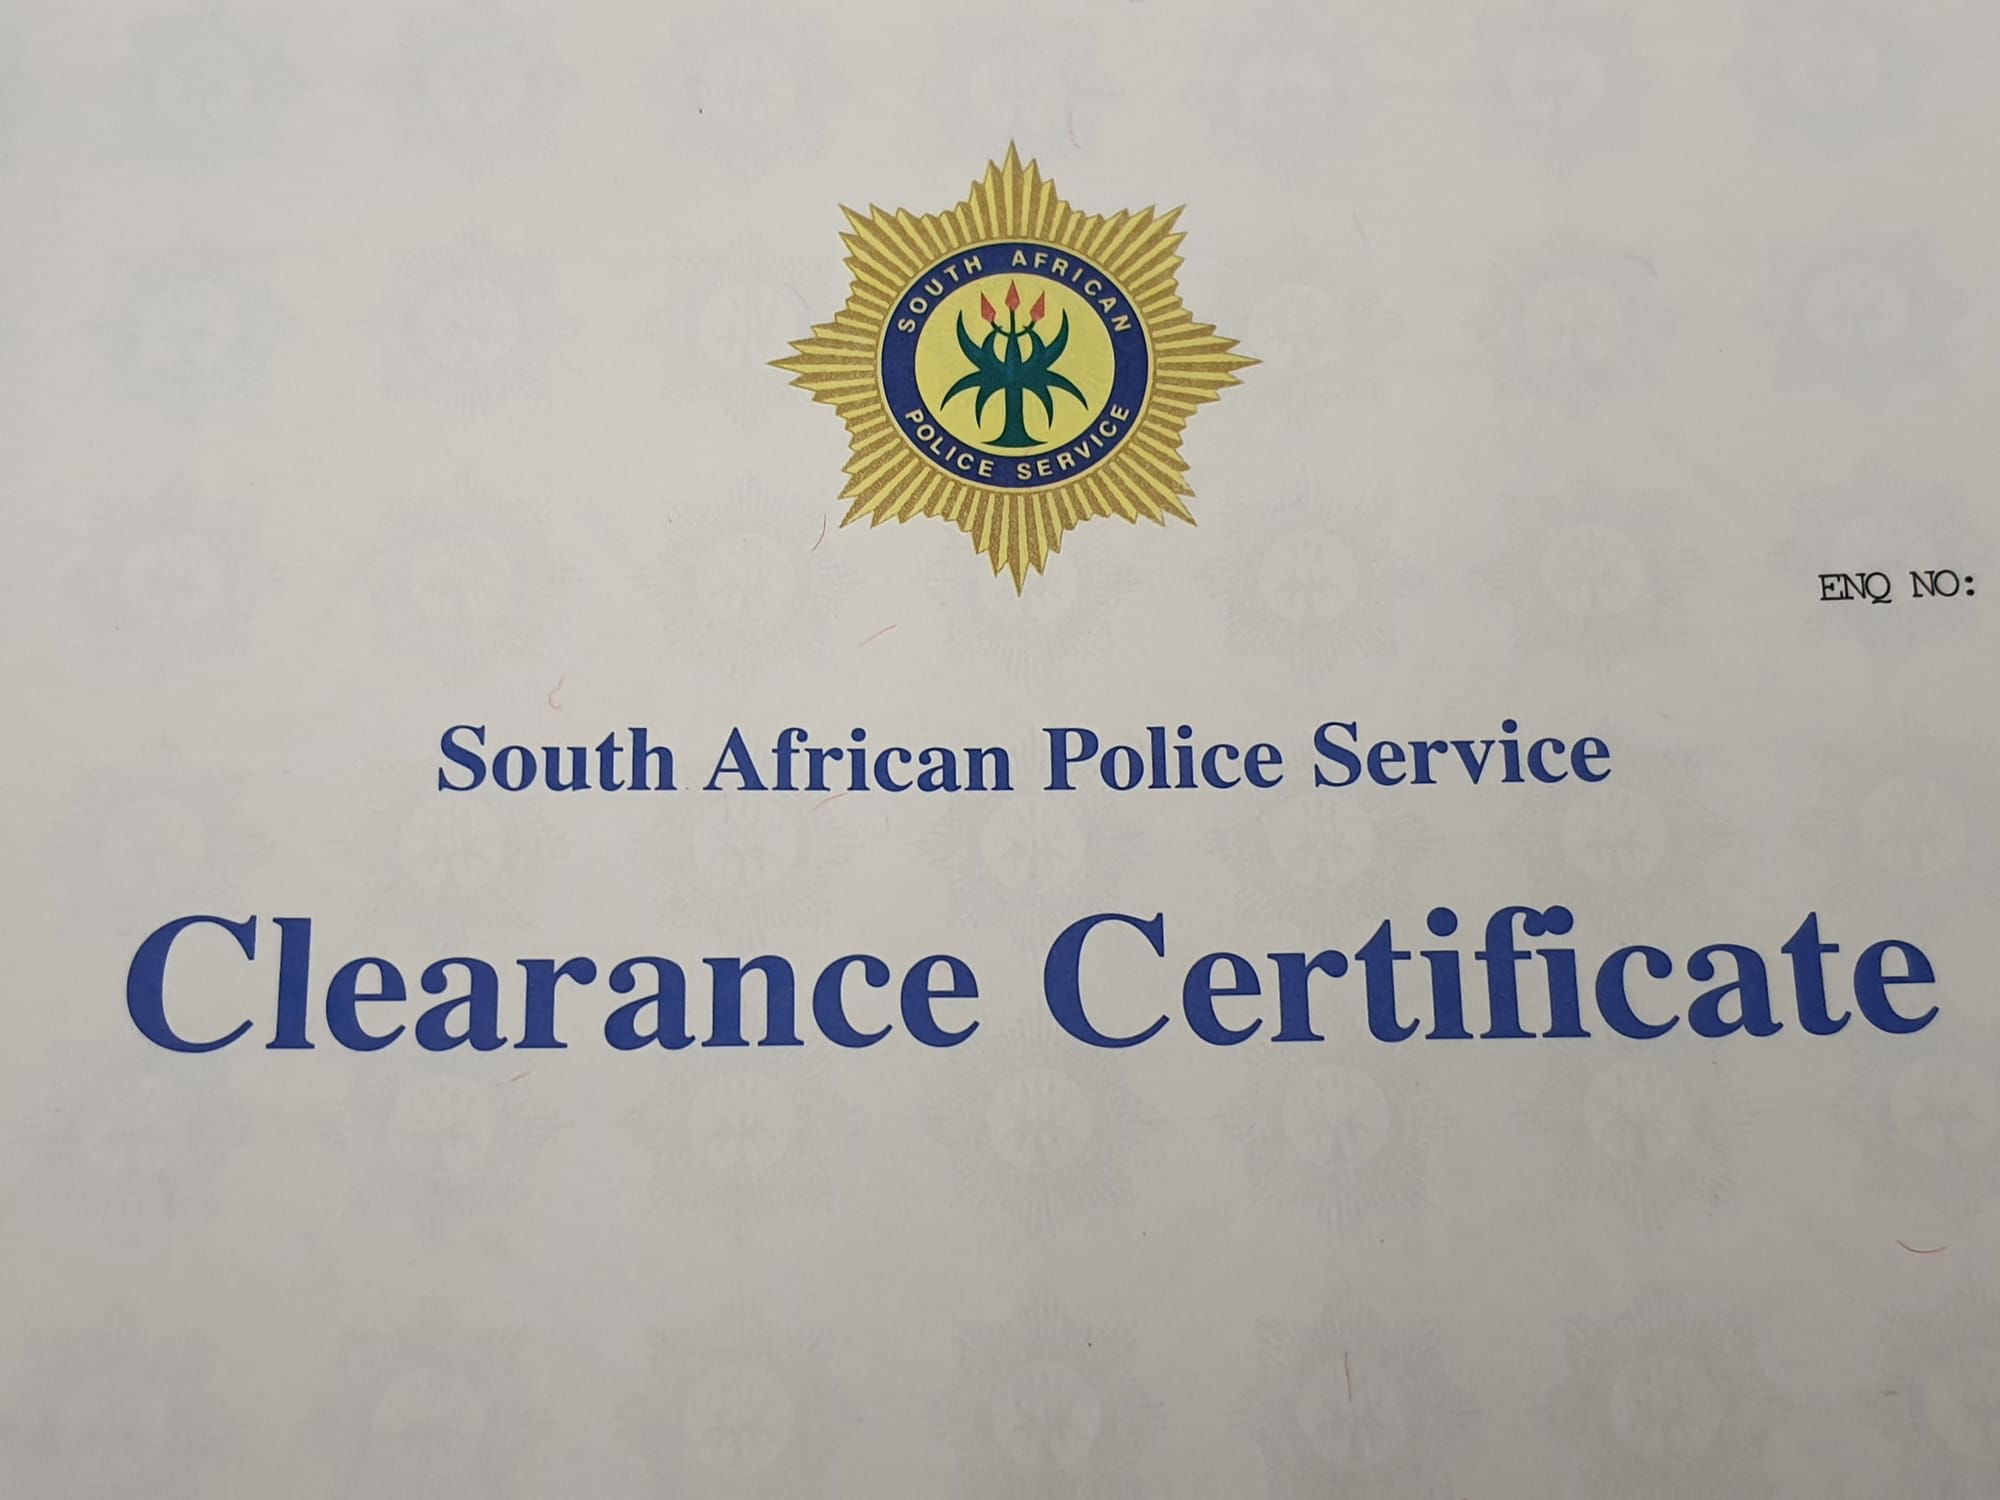 Police Clearance Certificate Service. Legalised for use outside South African borders.